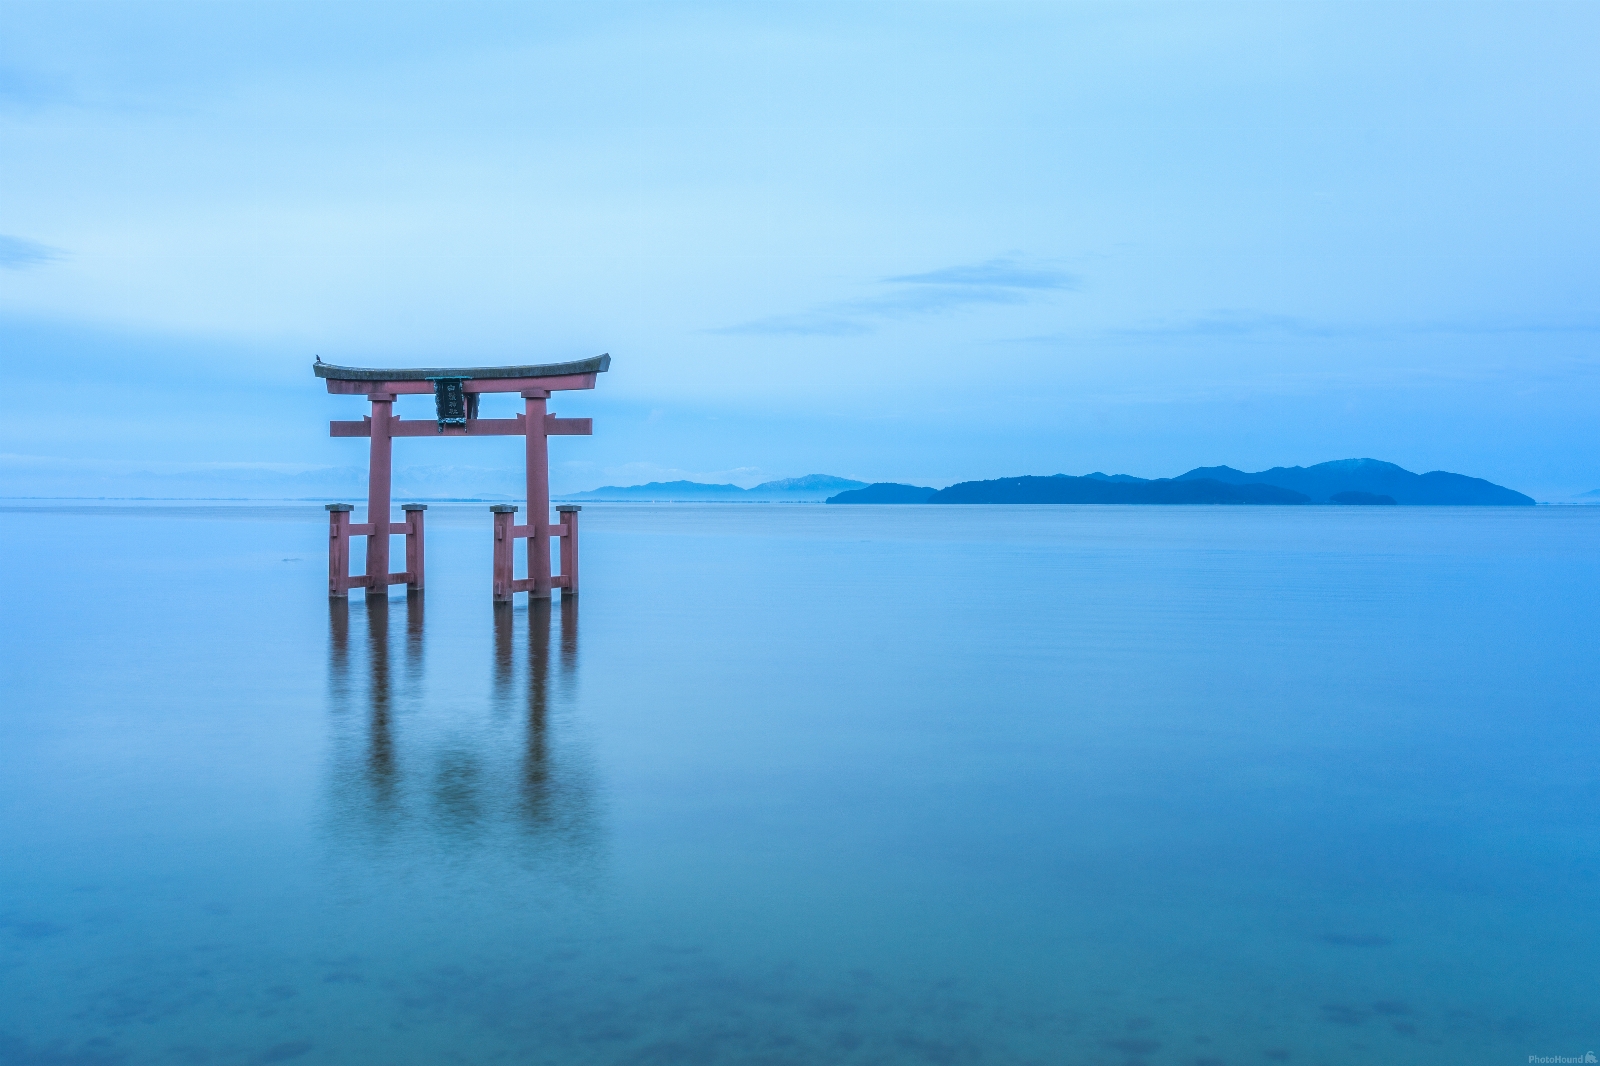 Image of Shirahige Shrine Torii by Colette English